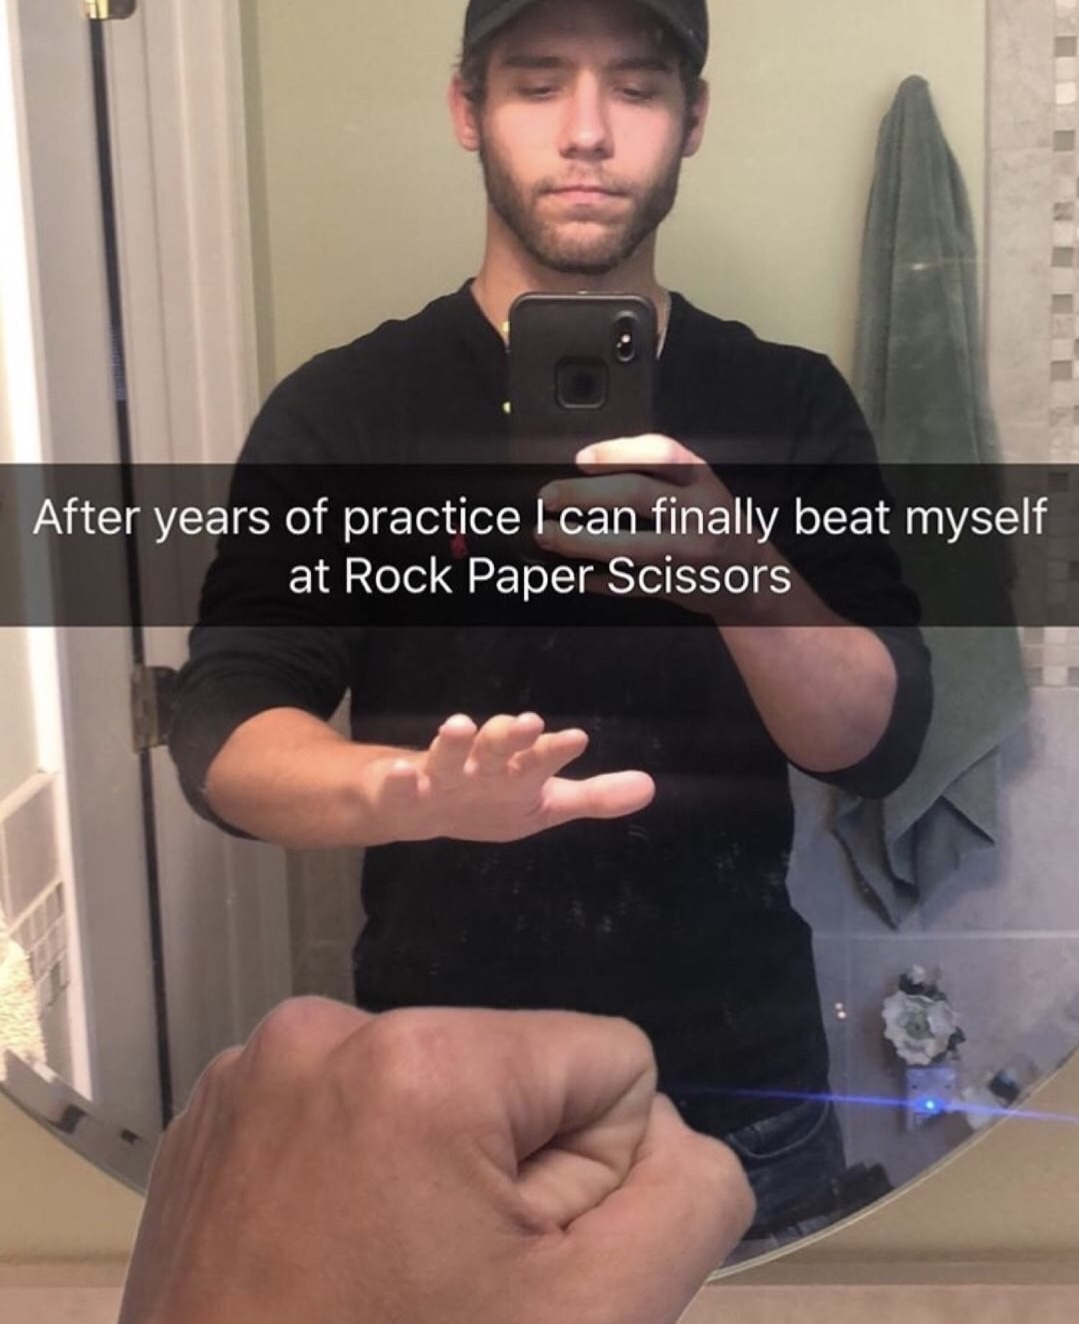 beat myself in rock paper scissors - After years of practice I can finally beat myself at Rock Paper Scissors